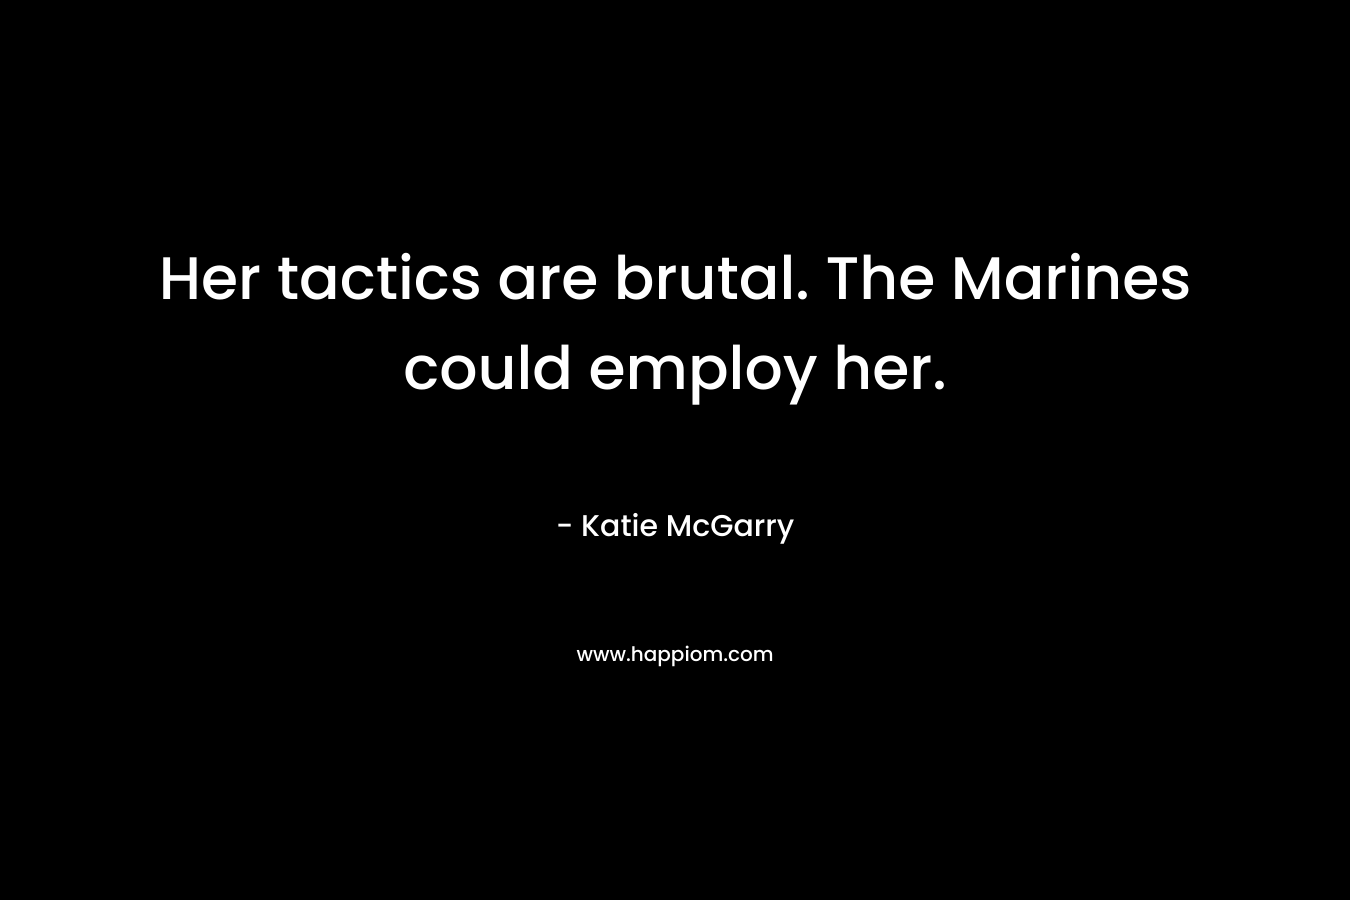 Her tactics are brutal. The Marines could employ her. – Katie McGarry